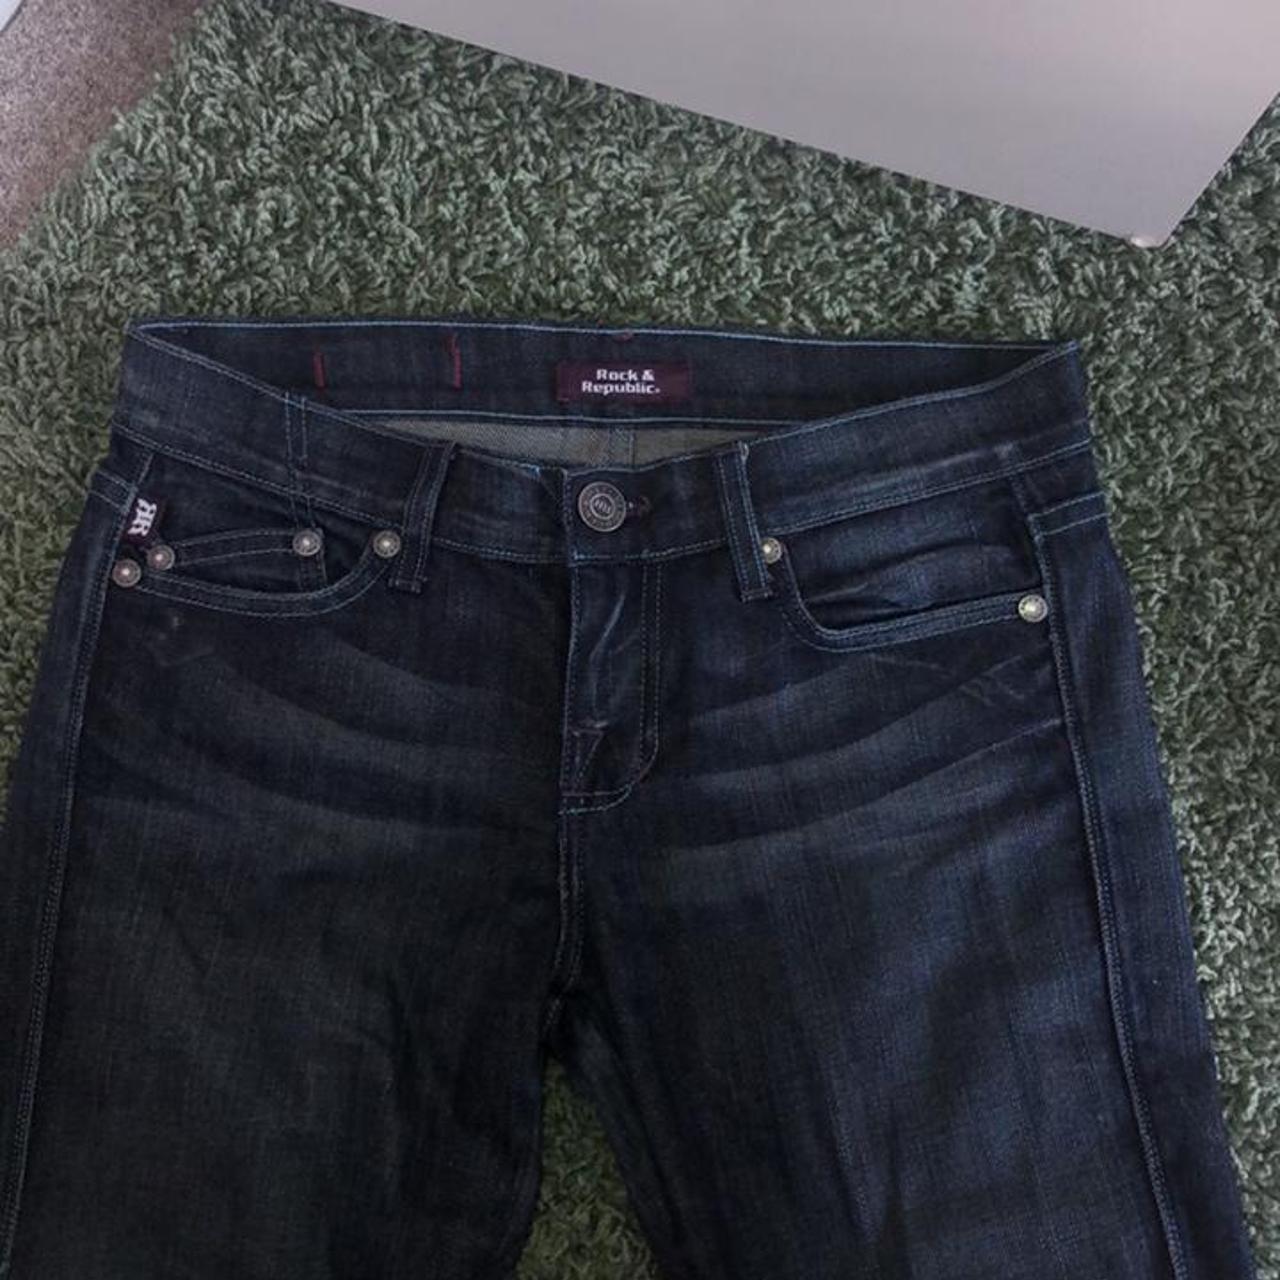 Rock and Republic jeans with rhinestones on the... - Depop